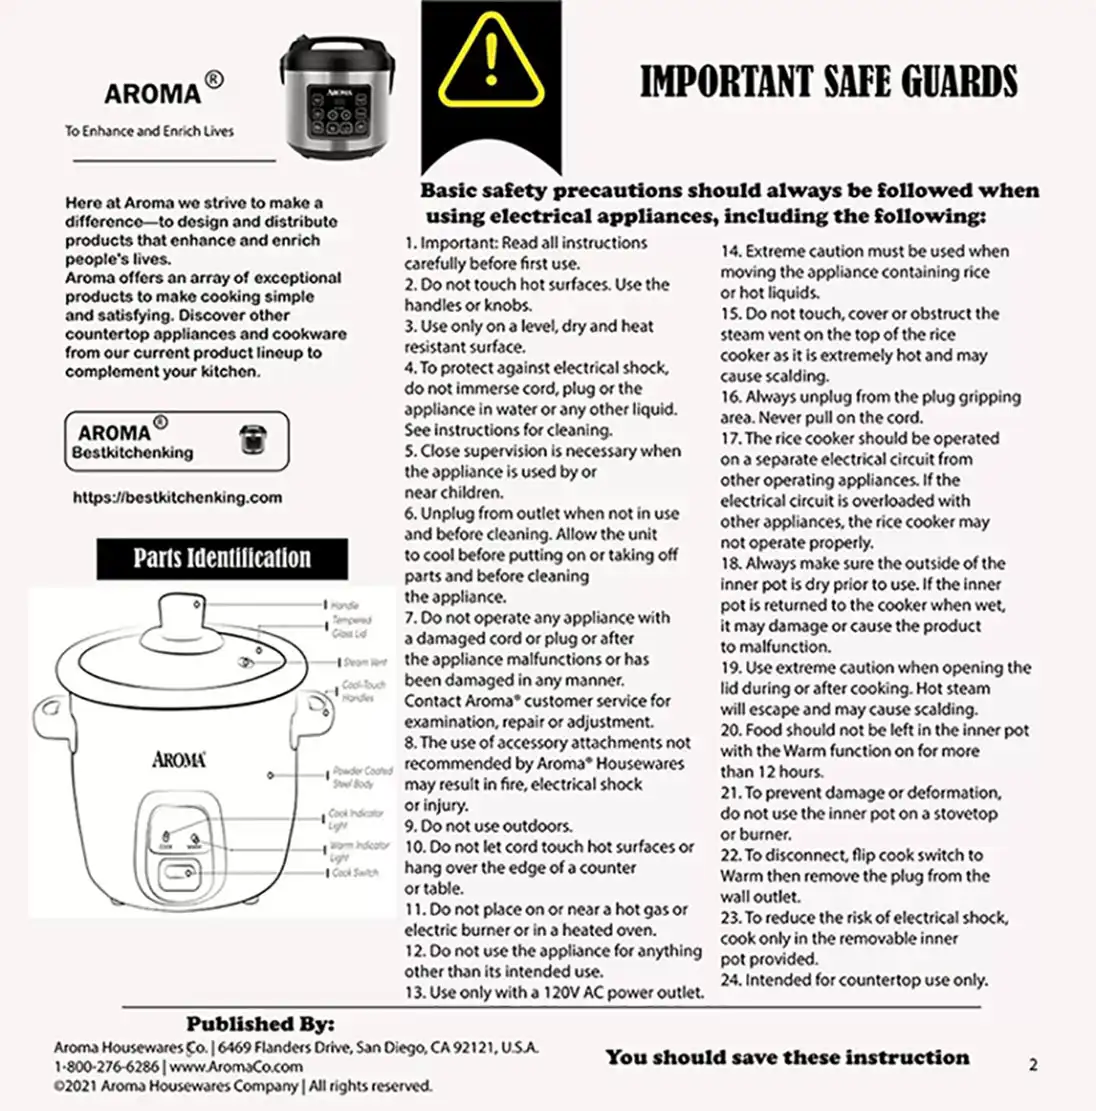 aroma rice cooker safe guards